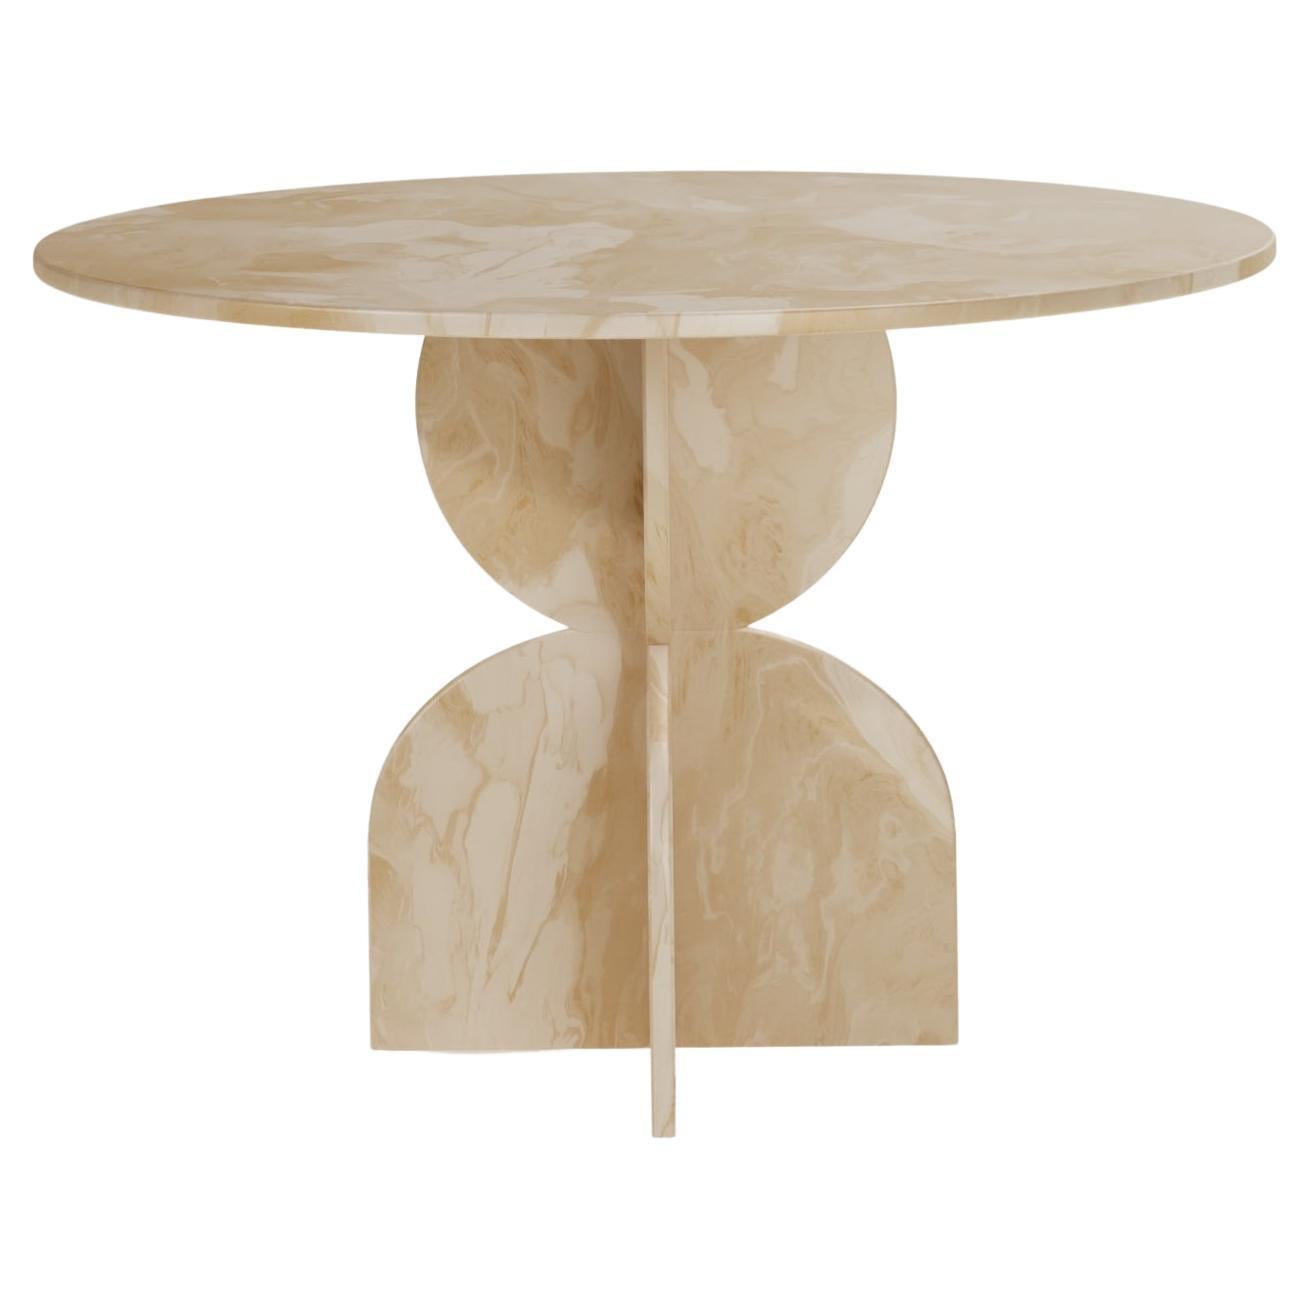 Contemporary Beige Round Table Handcrafted 100% Recycled Plastic by Anqa Studios For Sale